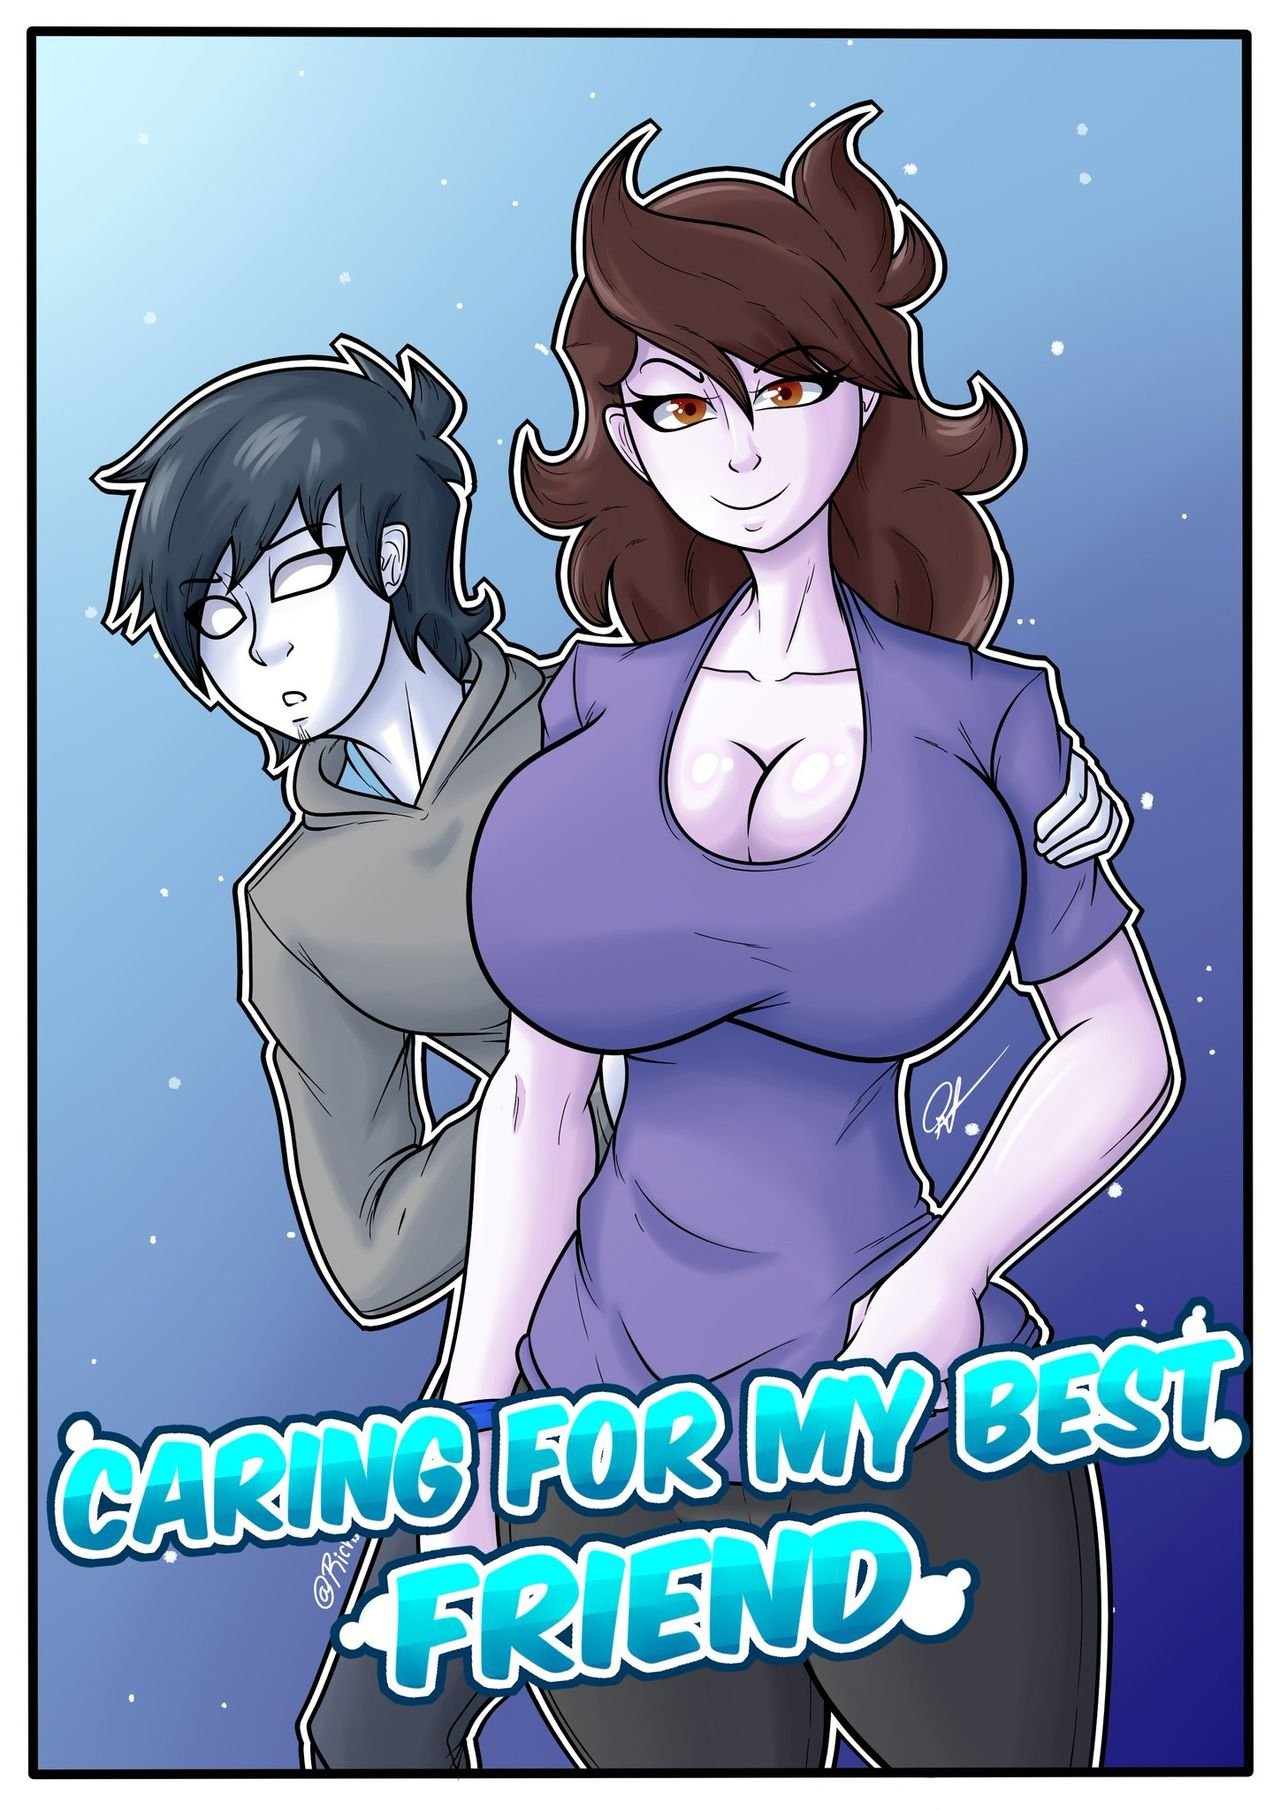 Caring For My Best Friend -Ongoing- comic porn HD Porn Comics image photo